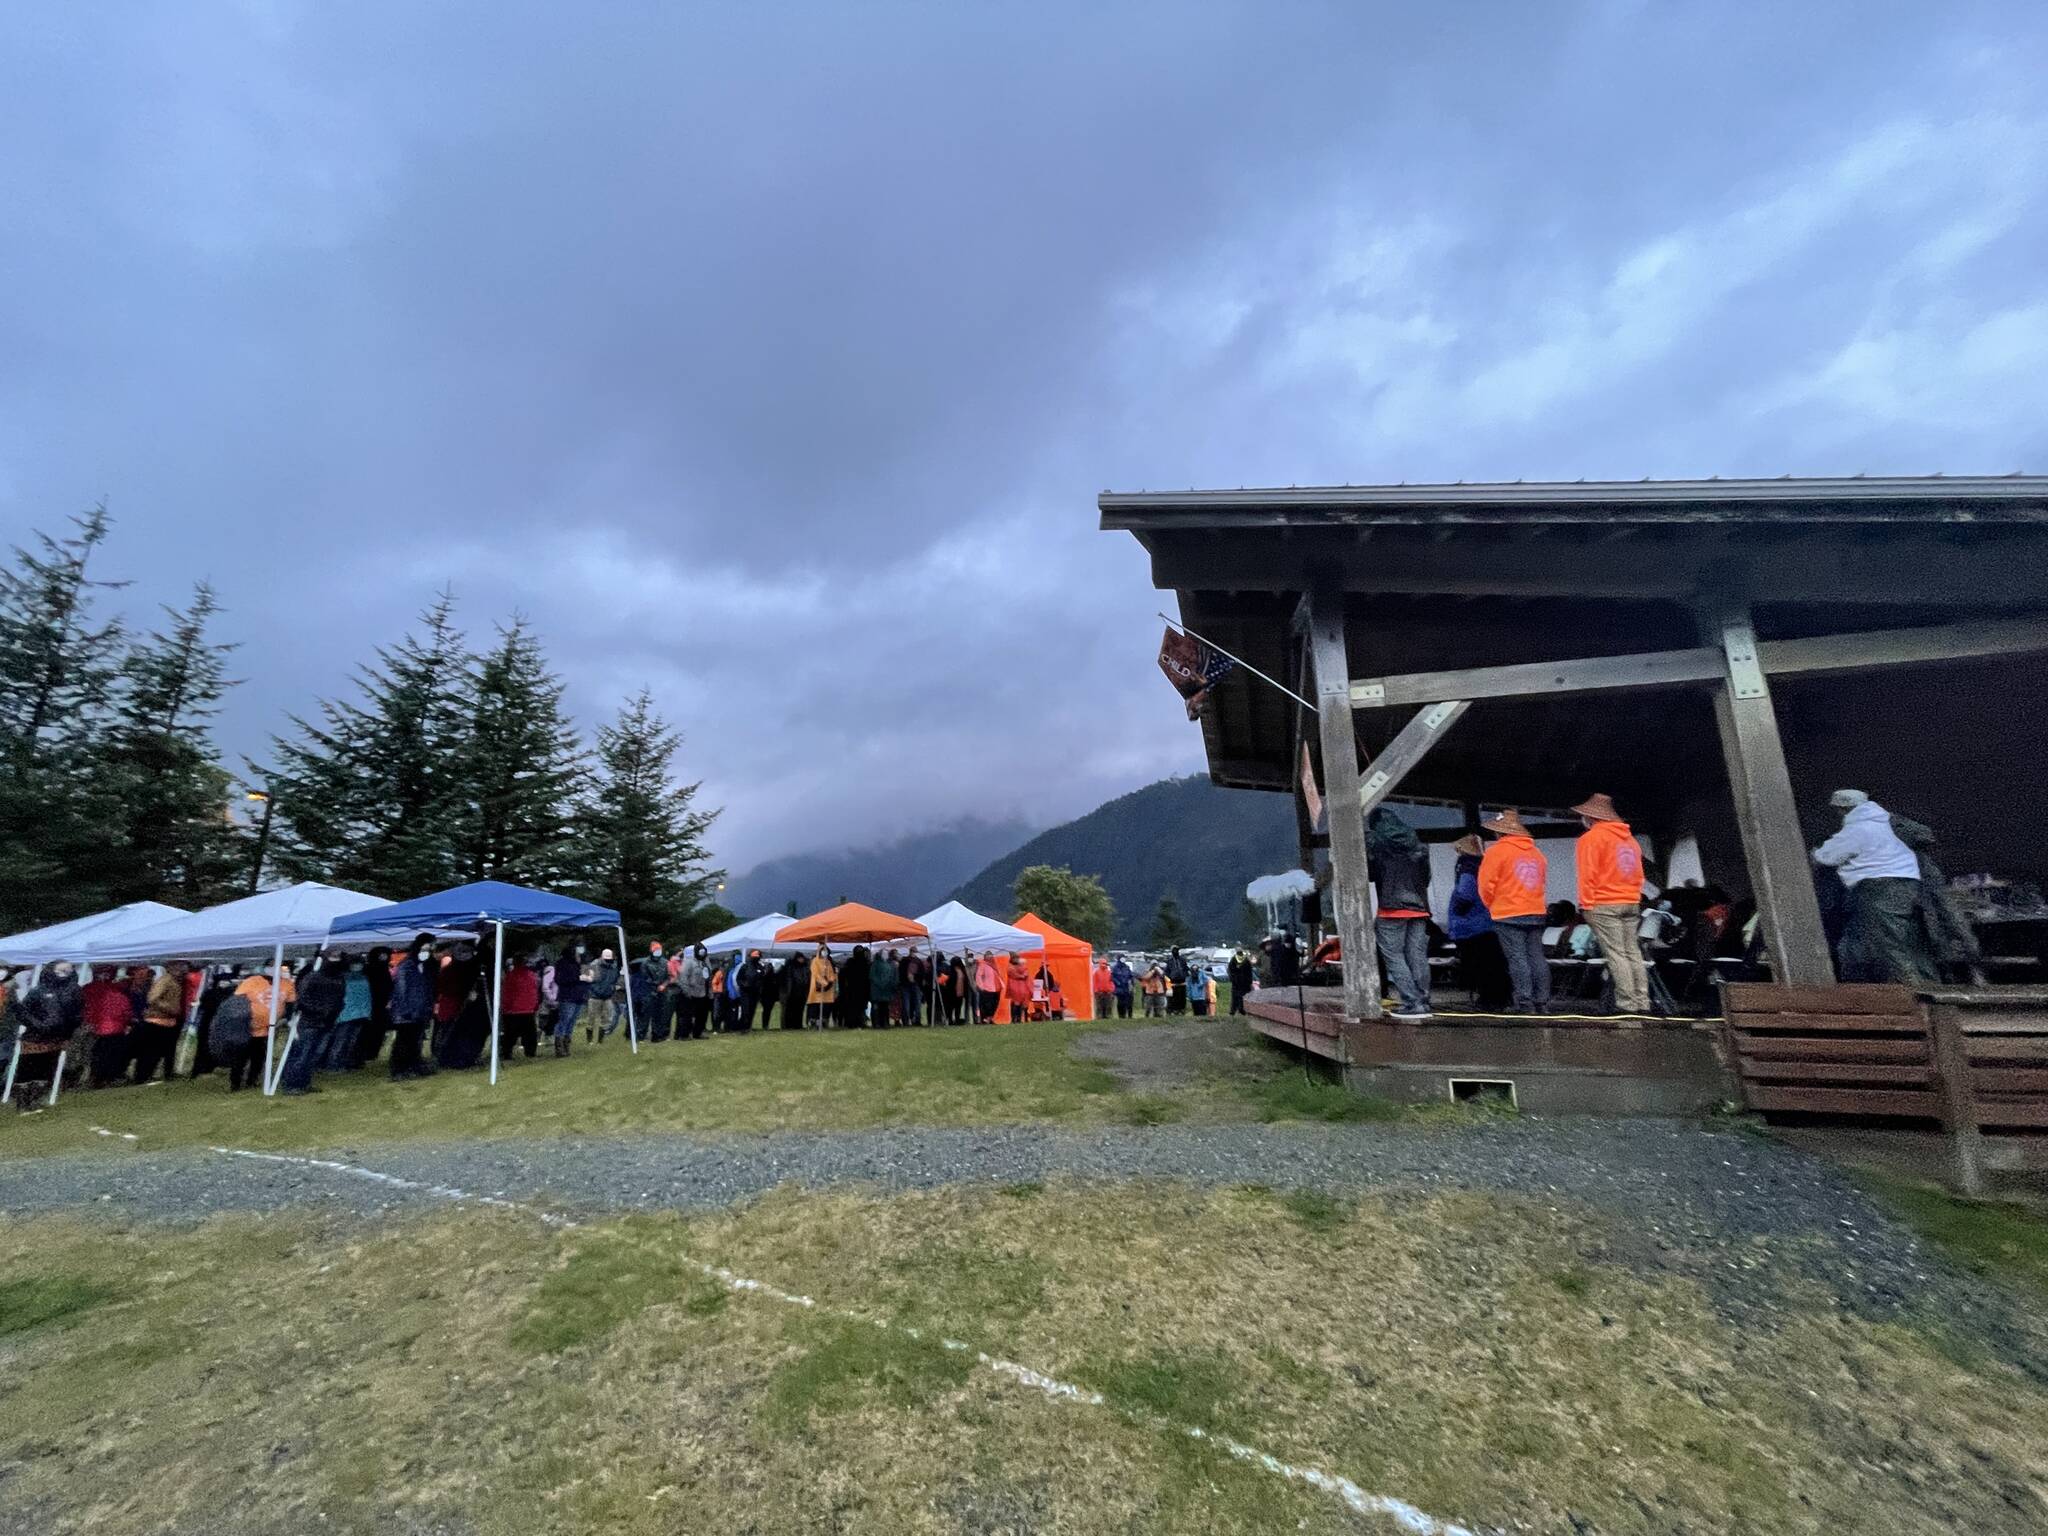 Michael S. Lockett / Juneau Empire
More than 100 people gathered at an Orange Shirt Day event near Sandy Beach on Sept. 30, 2021, a remembrance of the Indigenous children who died in North America in the residential school system.